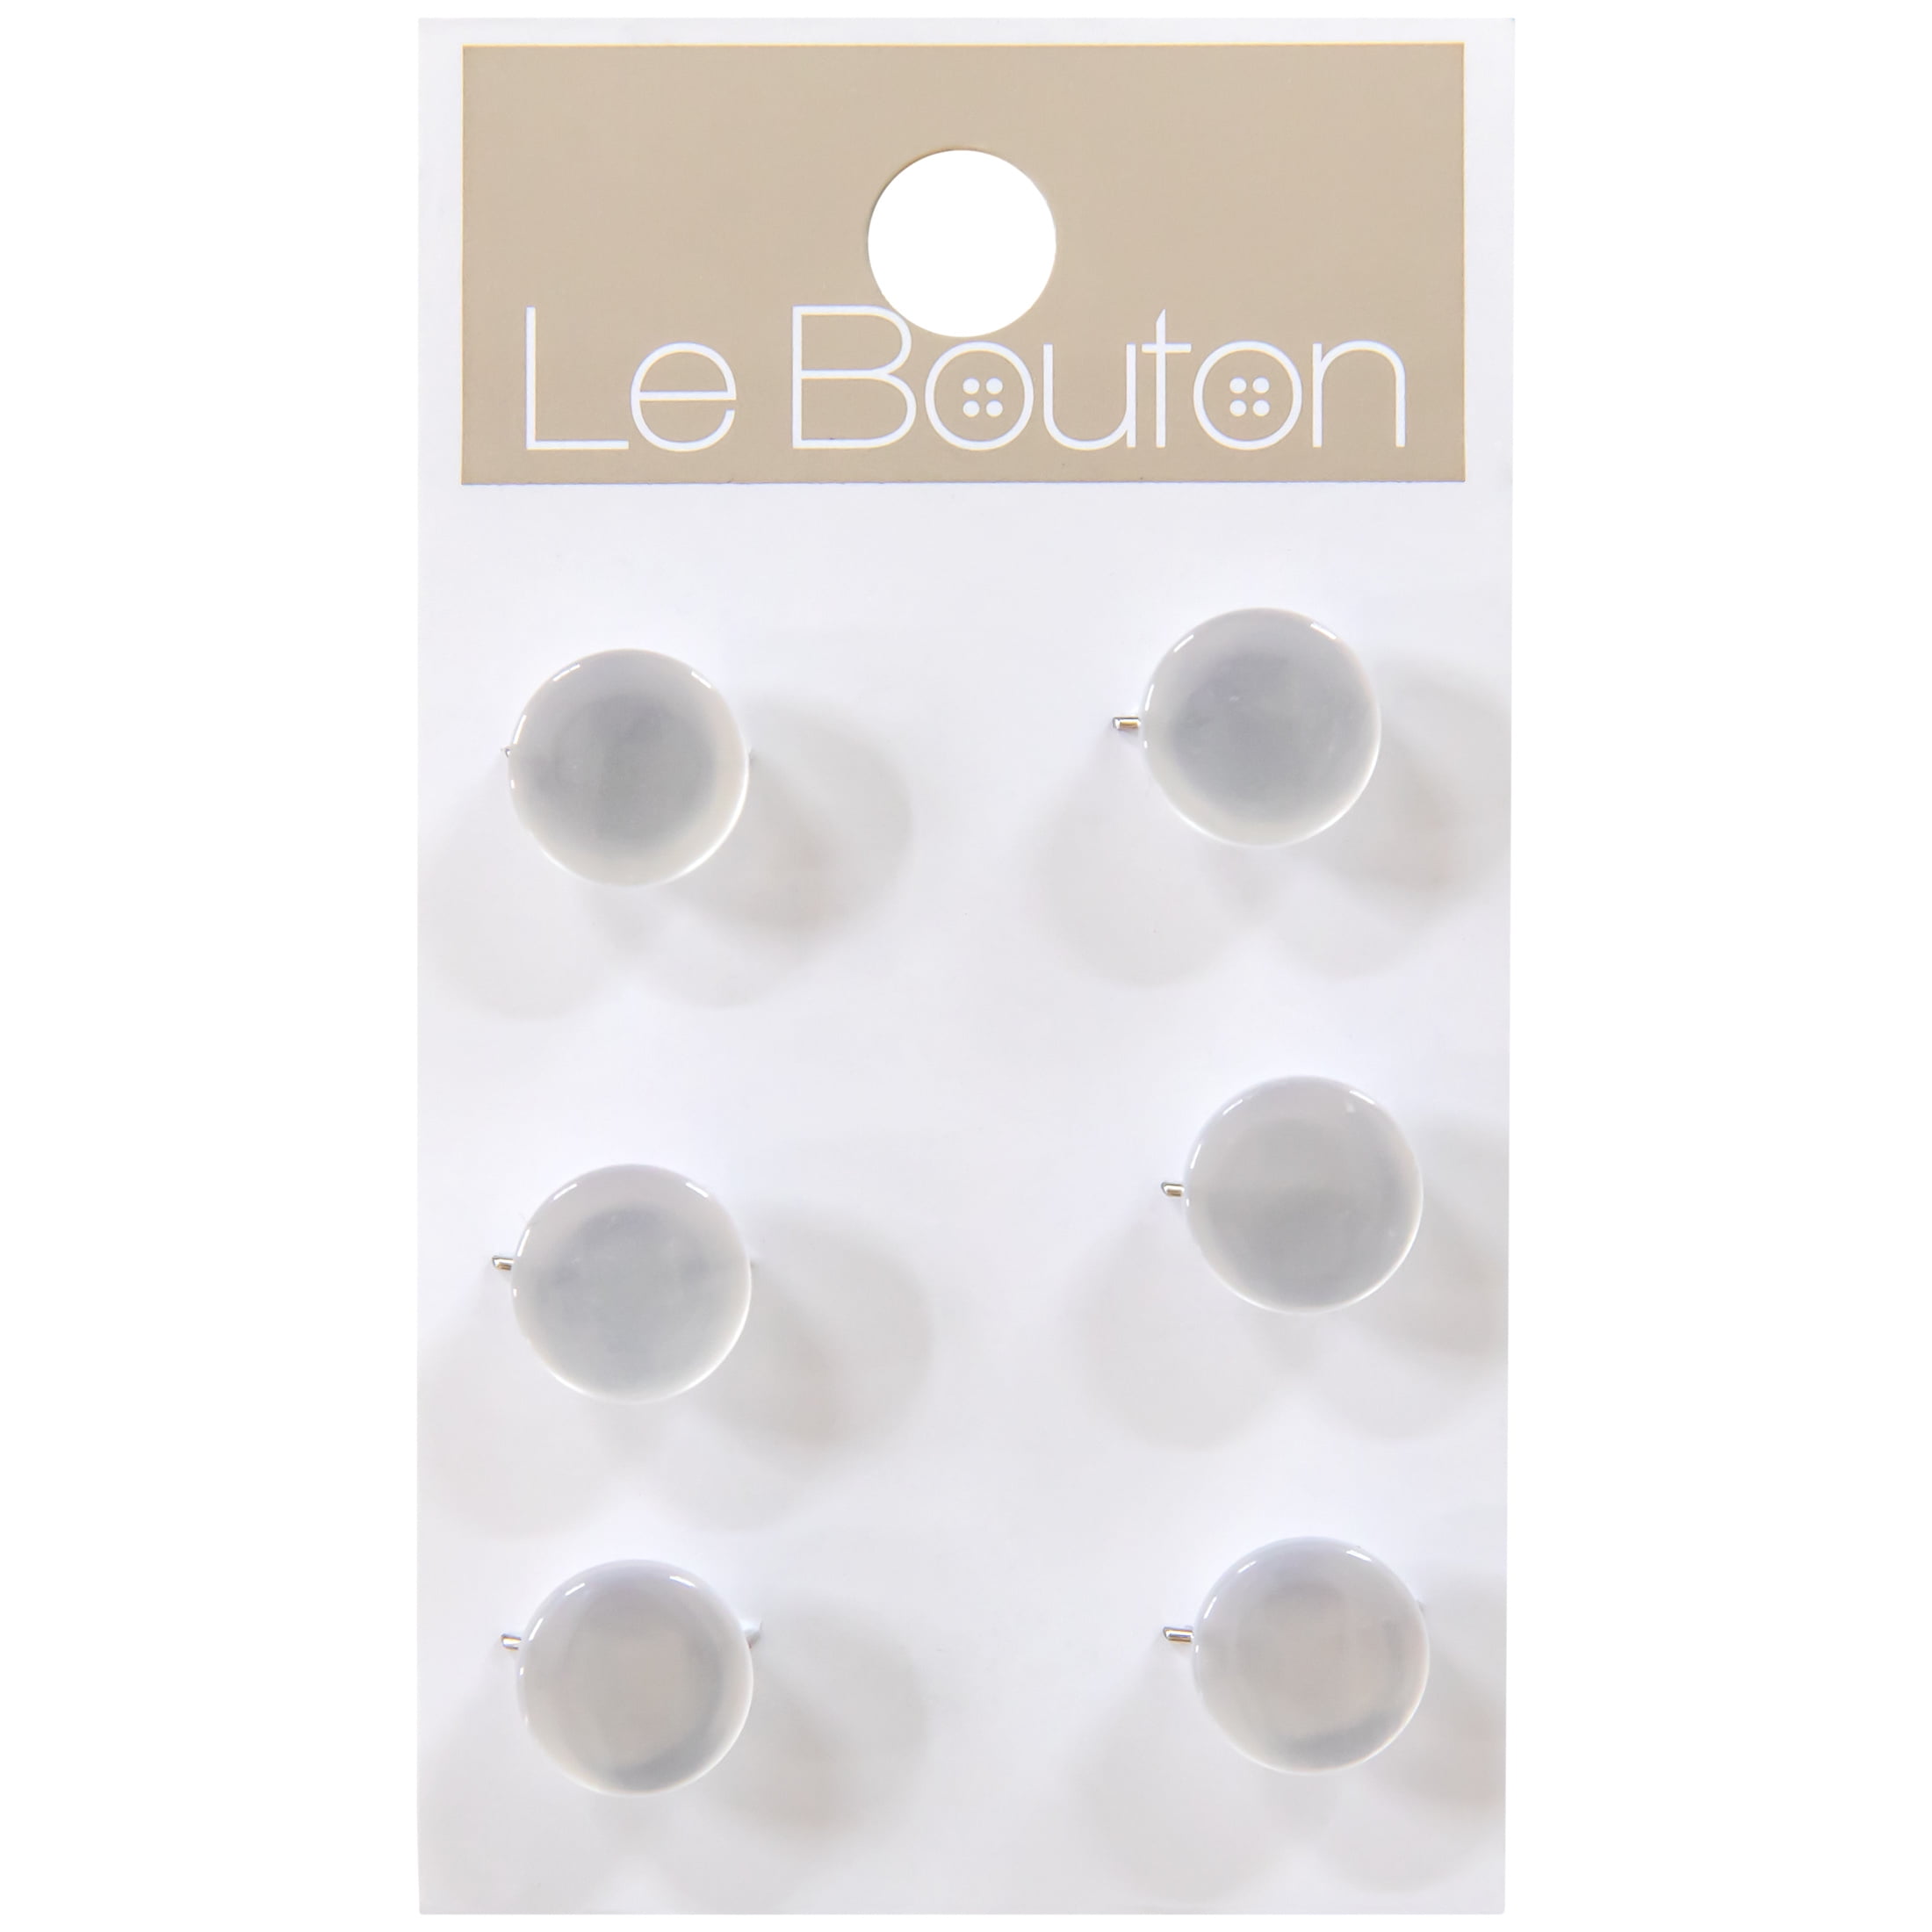 12 Details about    3/8" SNOWFLAKE WHITE PLASTIC REALISTIC CRAFT EMBELLISHMENT SHANK BUTTONS 